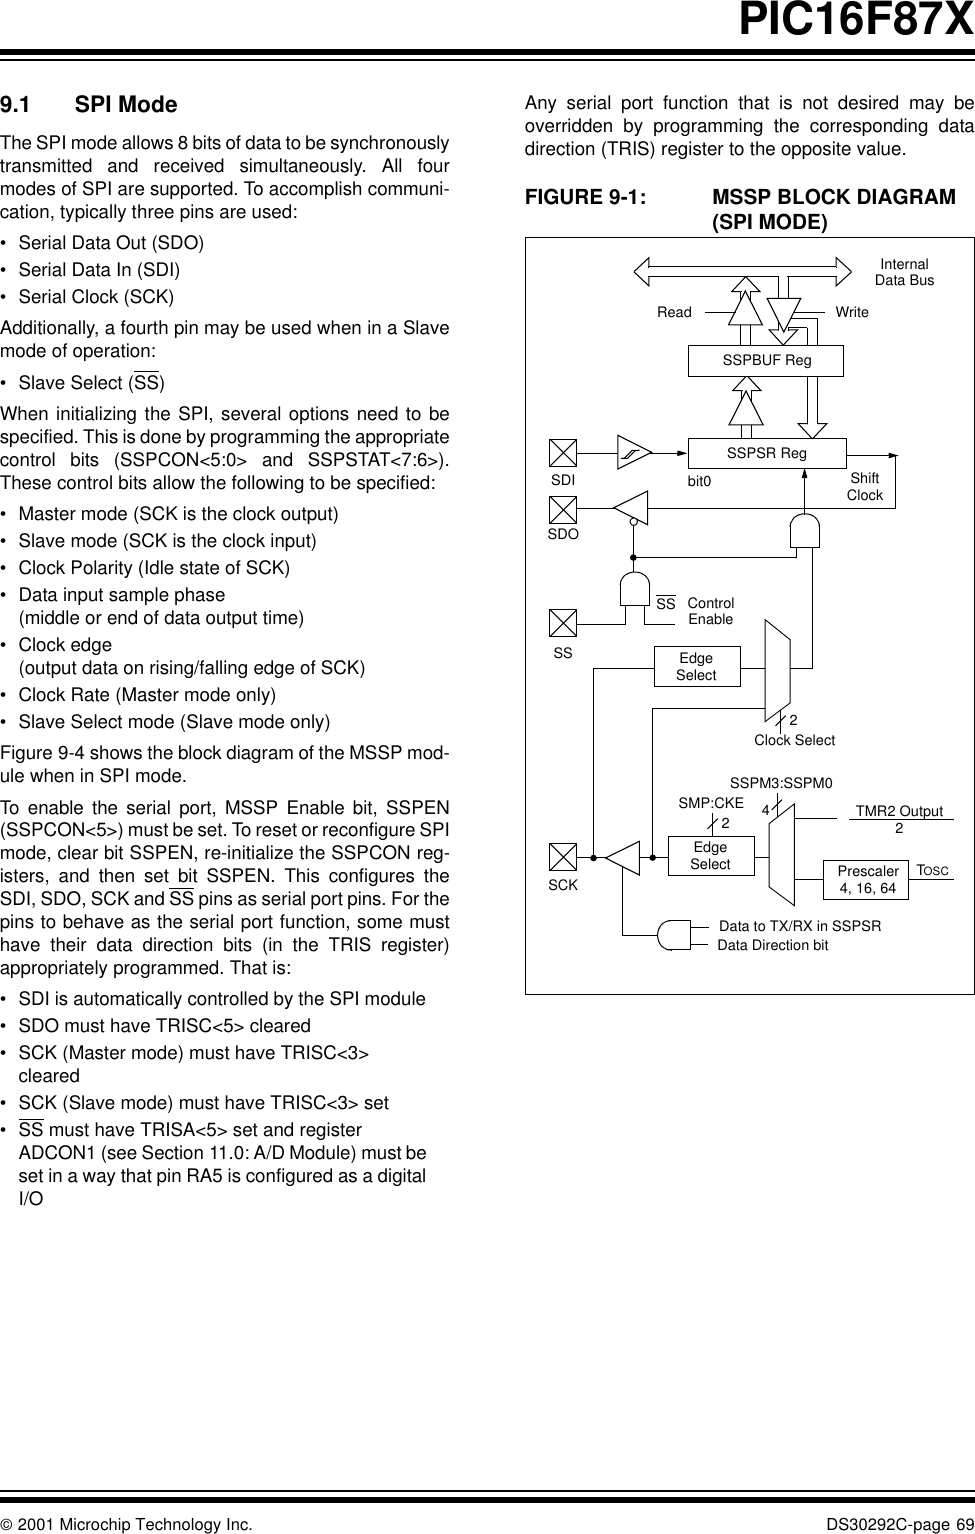  2001 Microchip Technology Inc. DS30292C-page 69PIC16F87X9.1 SPI ModeThe SPI mode allows 8 bits of data to be synchronouslytransmitted and received simultaneously. All fourmodes of SPI are supported. To accomplish communi-cation, typically three pins are used:•Serial Data Out (SDO) •Serial Data In (SDI) •Serial Clock (SCK)Additionally, a fourth pin may be used when in a Slavemode of operation:•Slave Select (SS) When initializing the SPI, several options need to bespecified. This is done by programming the appropriatecontrol bits (SSPCON&lt;5:0&gt; and SSPSTAT&lt;7:6&gt;).These control bits allow the following to be specified:•Master mode (SCK is the clock output)•Slave mode (SCK is the clock input)•Clock Polarity (Idle state of SCK)•Data input sample phase (middle or end of data output time)•Clock edge (output data on rising/falling edge of SCK)•Clock Rate (Master mode only)•Slave Select mode (Slave mode only)Figure 9-4 shows the block diagram of the MSSP mod-ule when in SPI mode.To enable the serial port, MSSP Enable bit, SSPEN(SSPCON&lt;5&gt;) must be set. To reset or reconfigure SPImode, clear bit SSPEN, re-initialize the SSPCON reg-isters, and then set bit SSPEN. This configures theSDI, SDO, SCK and SS pins as serial port pins. For thepins to behave as the serial port function, some musthave their data direction bits (in the TRIS register)appropriately programmed. That is:•SDI is automatically controlled by the SPI module •SDO must have TRISC&lt;5&gt; cleared•SCK (Master mode) must have TRISC&lt;3&gt; cleared•SCK (Slave mode) must have TRISC&lt;3&gt; set •SS must have TRISA&lt;5&gt; set and register ADCON1 (see Section 11.0: A/D Module) must be set in a way that pin RA5 is configured as a digital I/OAny serial port function that is not desired may beoverridden by programming the corresponding datadirection (TRIS) register to the opposite value. FIGURE 9-1: MSSP BLOCK DIAGRAM (SPI MODE)    Read WriteInternalData BusSSPSR RegSSPM3:SSPM0bit0 ShiftClockSS ControlEnableEdgeSelectClock SelectTMR2 OutputTOSCPrescaler4, 16, 642EdgeSelect24Data to TX/RX in SSPSRData Direction bit2SMP:CKESDISDOSSSCKSSPBUF Reg